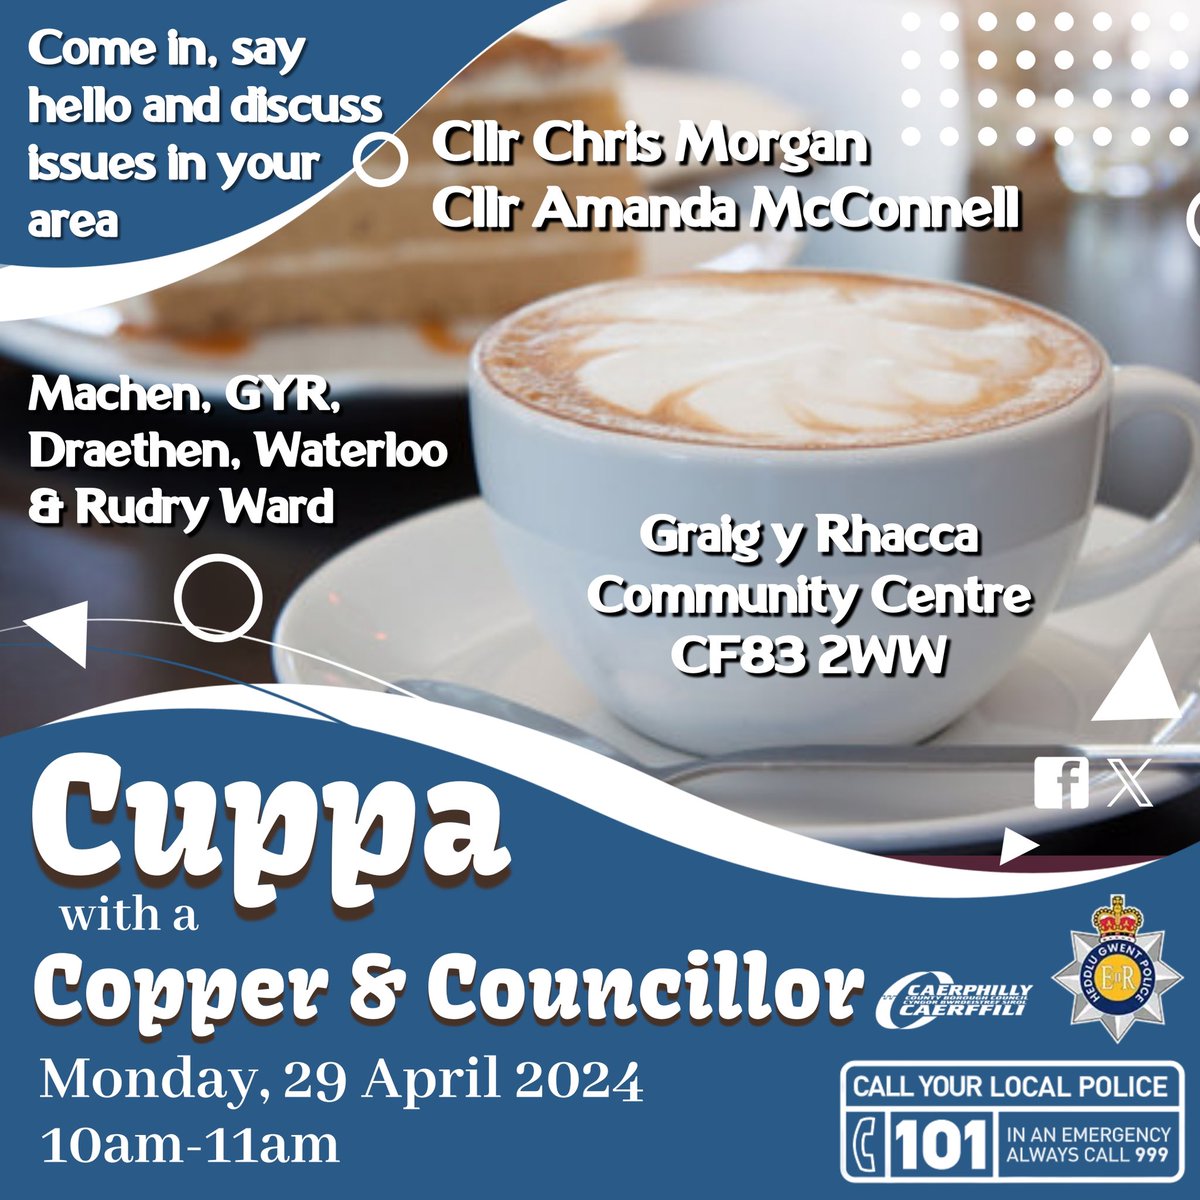 💬 Cuppa with a Copper & Councillor 
📆 Monday, 29 April 2024
📍Graig y Rhacca Community Centre 

👉Come in, say hello and discuss issues in your area.

#GYR #CuppaCopperCllr #YourVoice #GwentPolice #CCBC #GYRCC #MachenRudryWard #GYRarea Cllr @morgac15 @GPCaerphilly